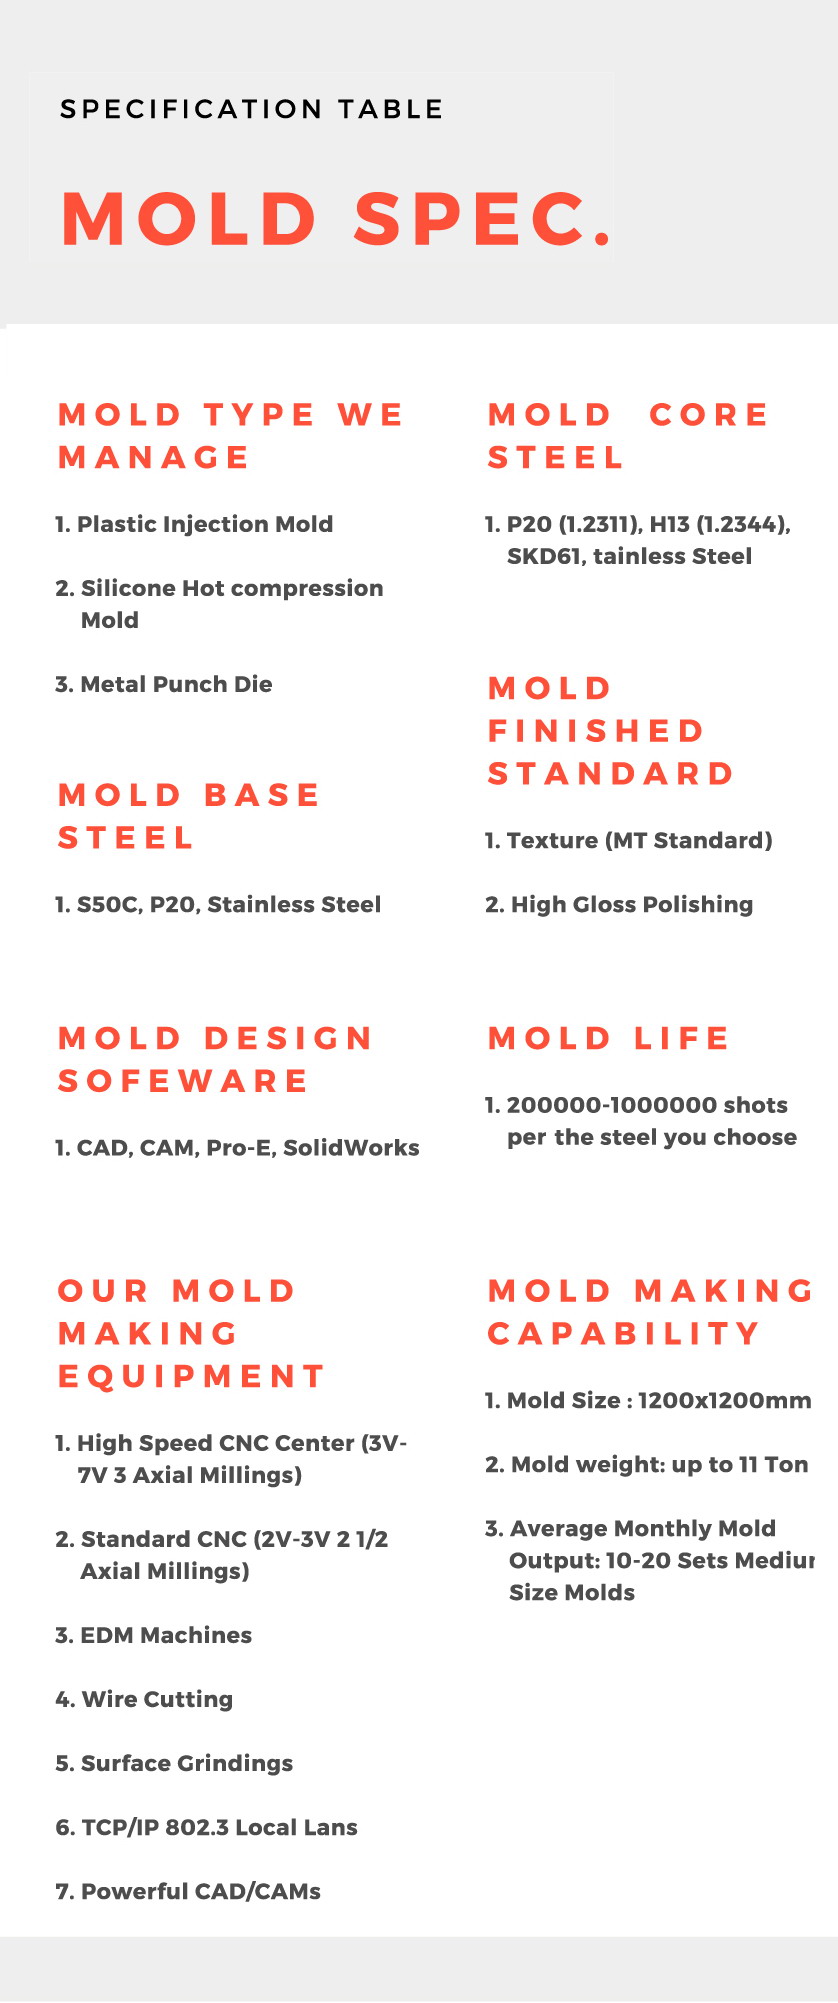 Mold specification